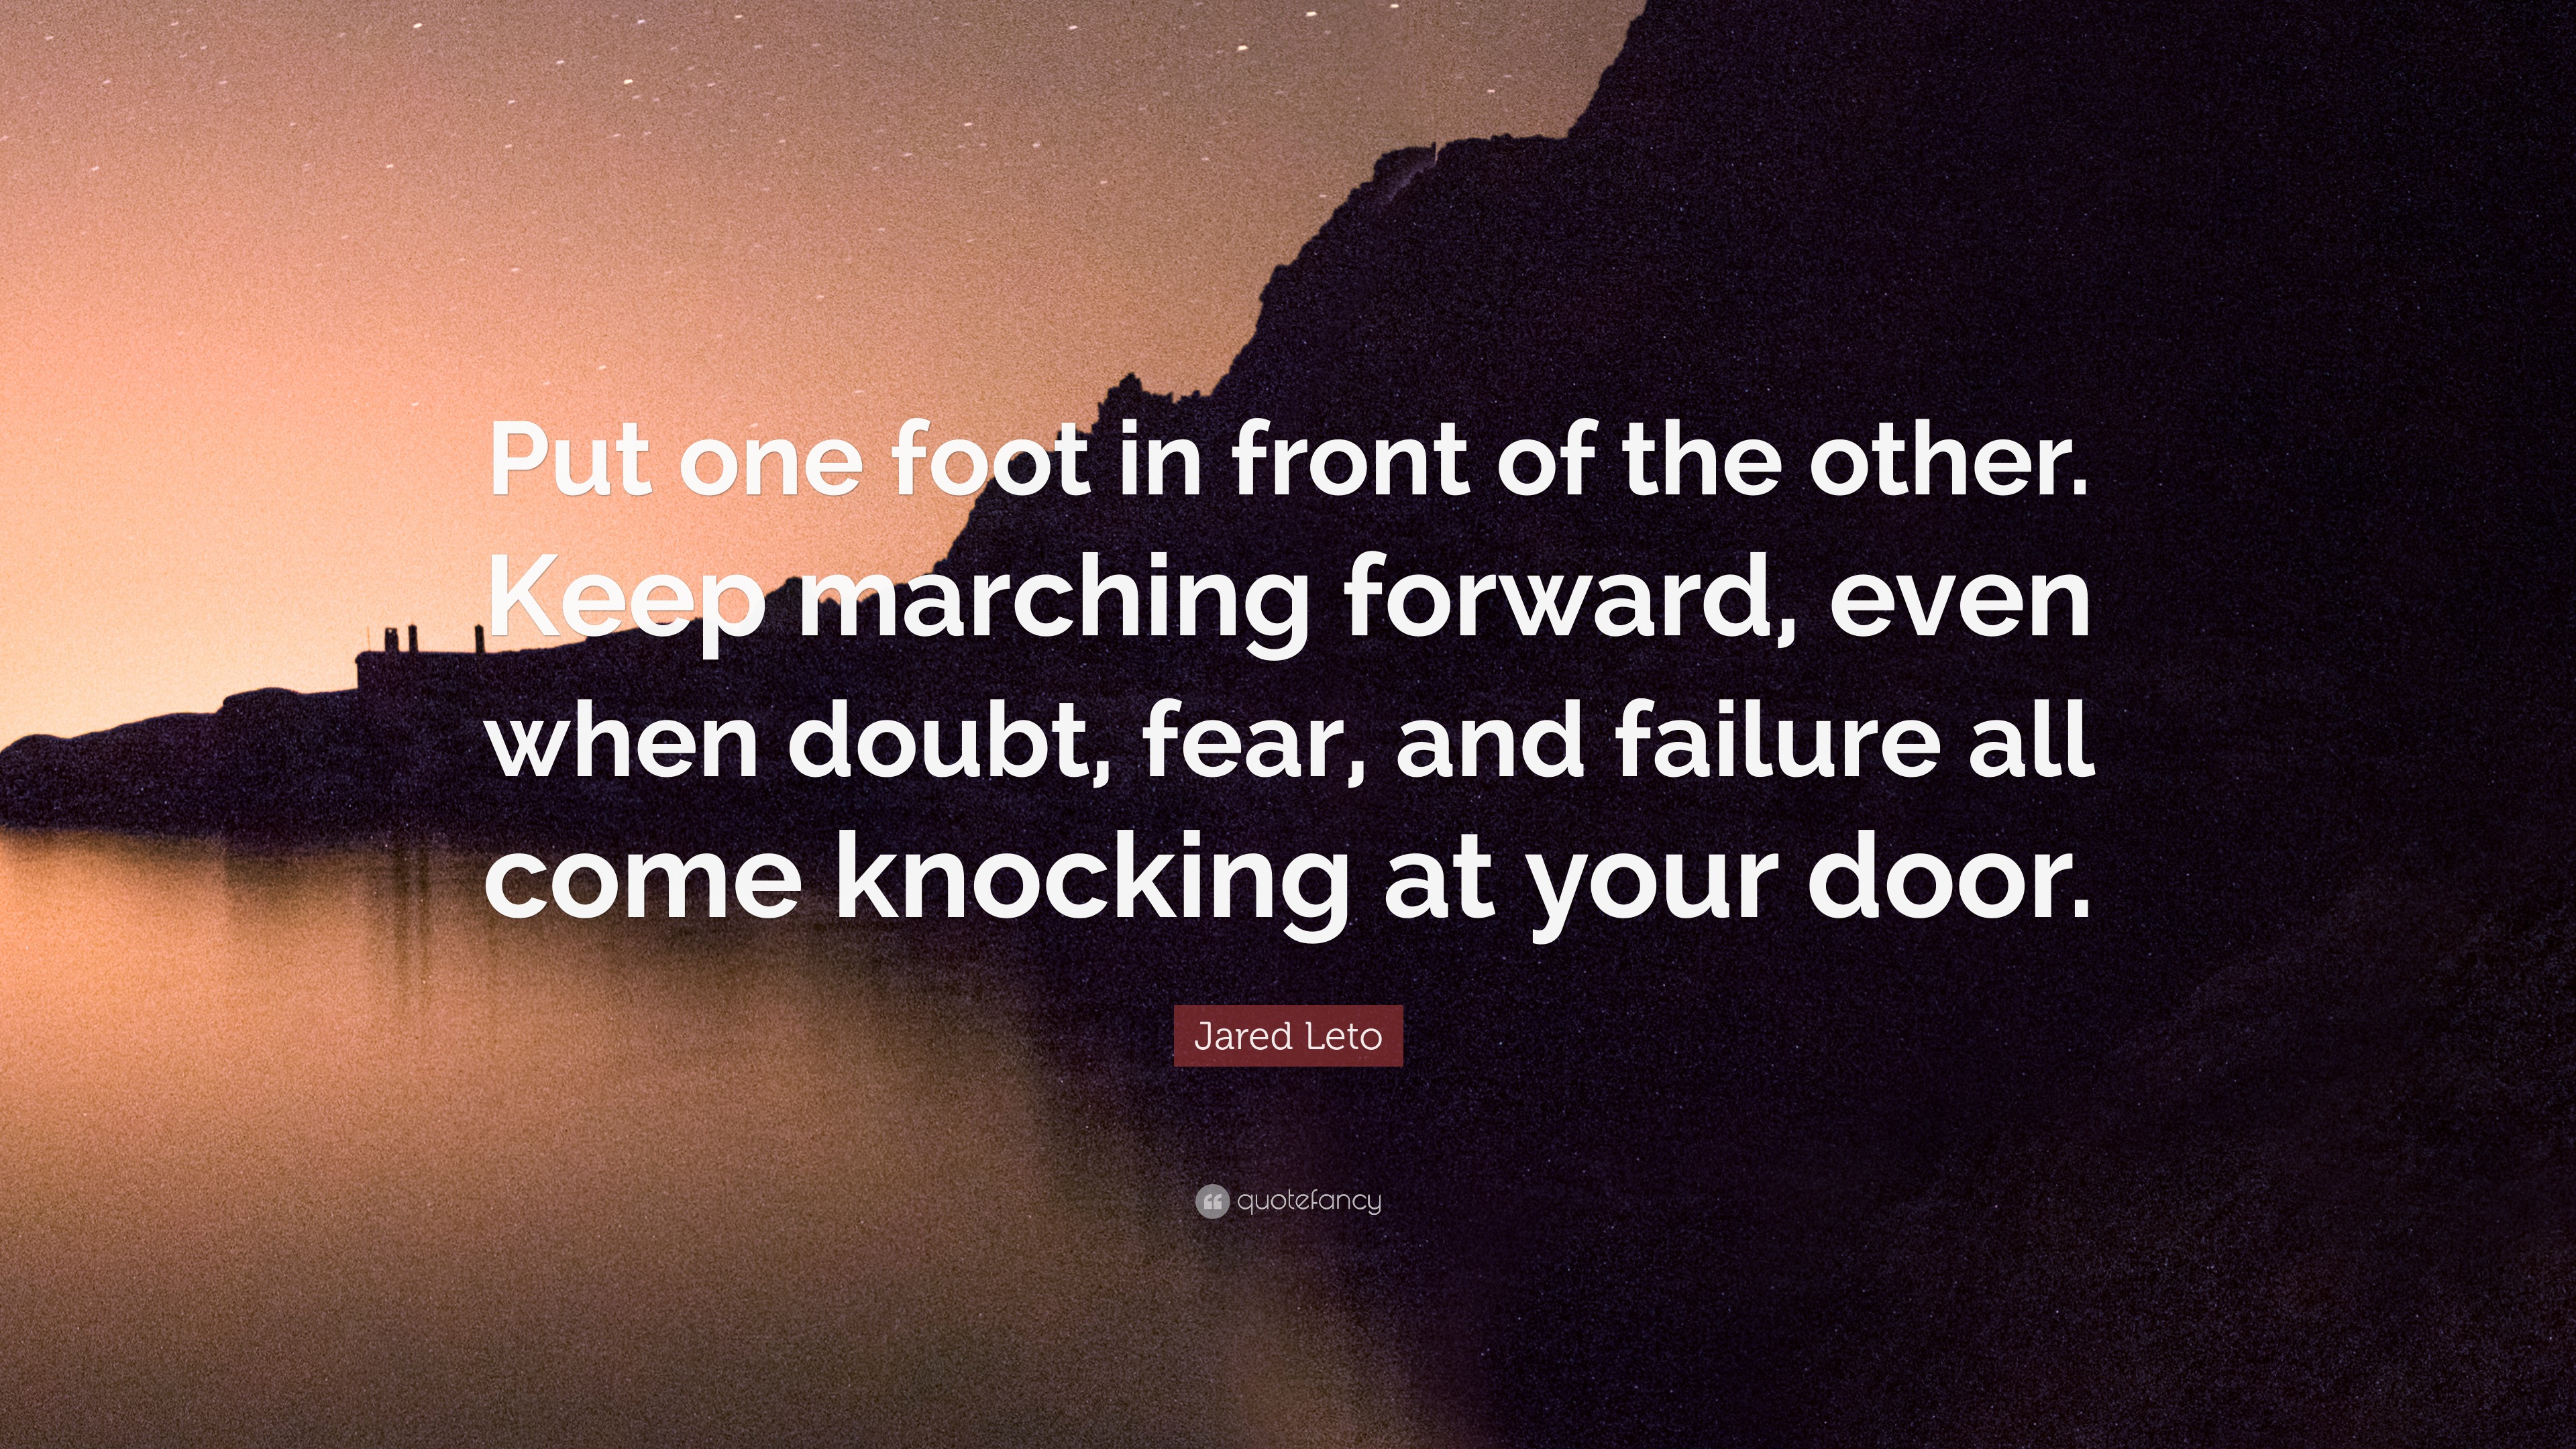 Keep marching forward, even when doubt, fear, and failure all come knocking...